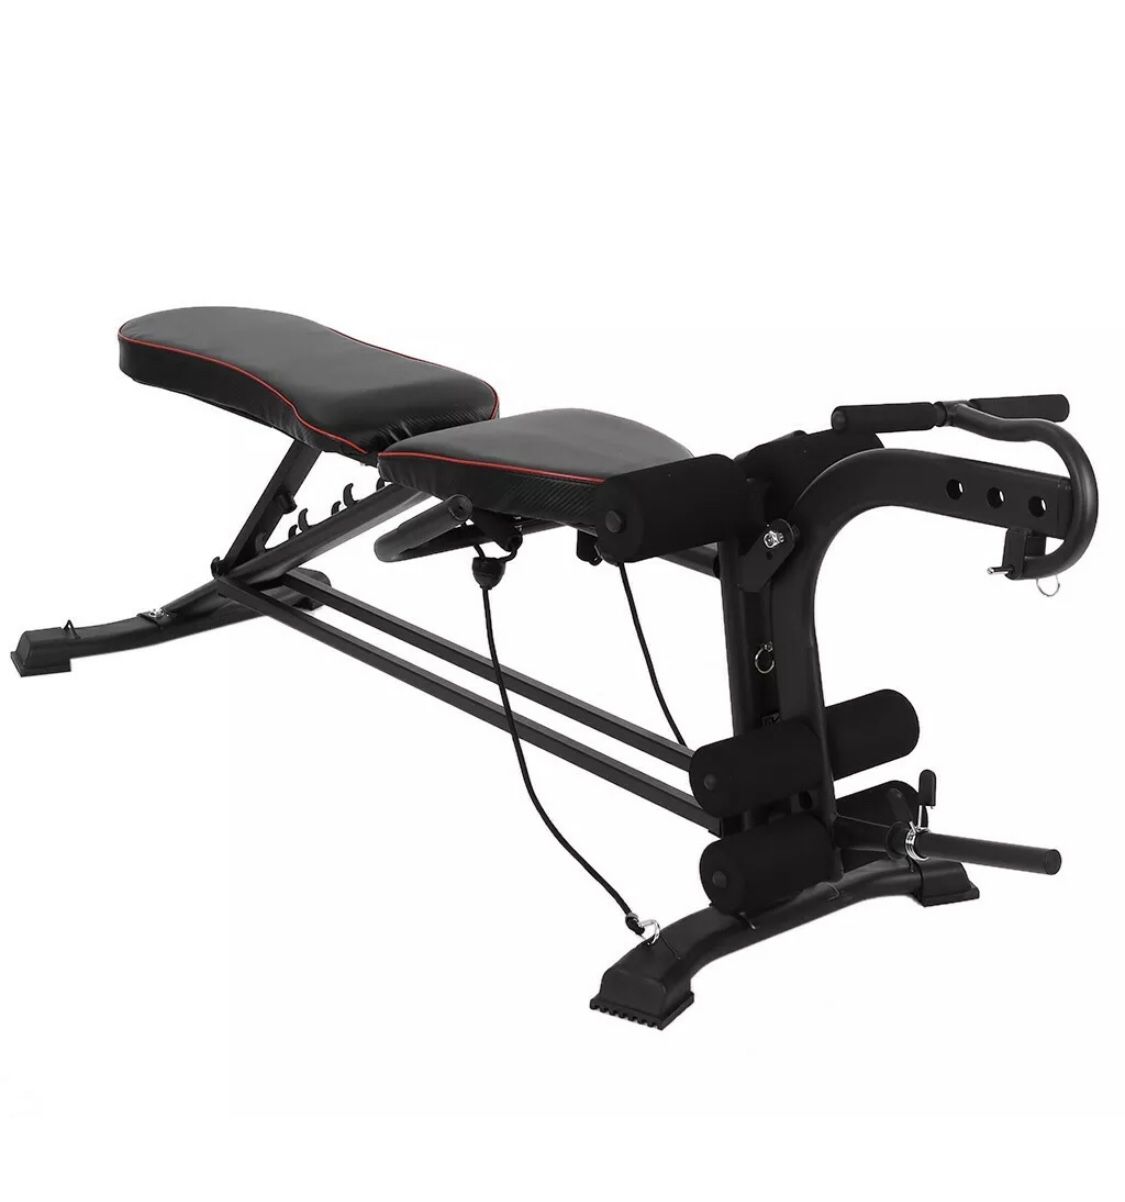 🔥BRAND NEW Adjustable Sit Up A B Incline Abs Bench Flat Fly Weight Press Gym Fitness Rope